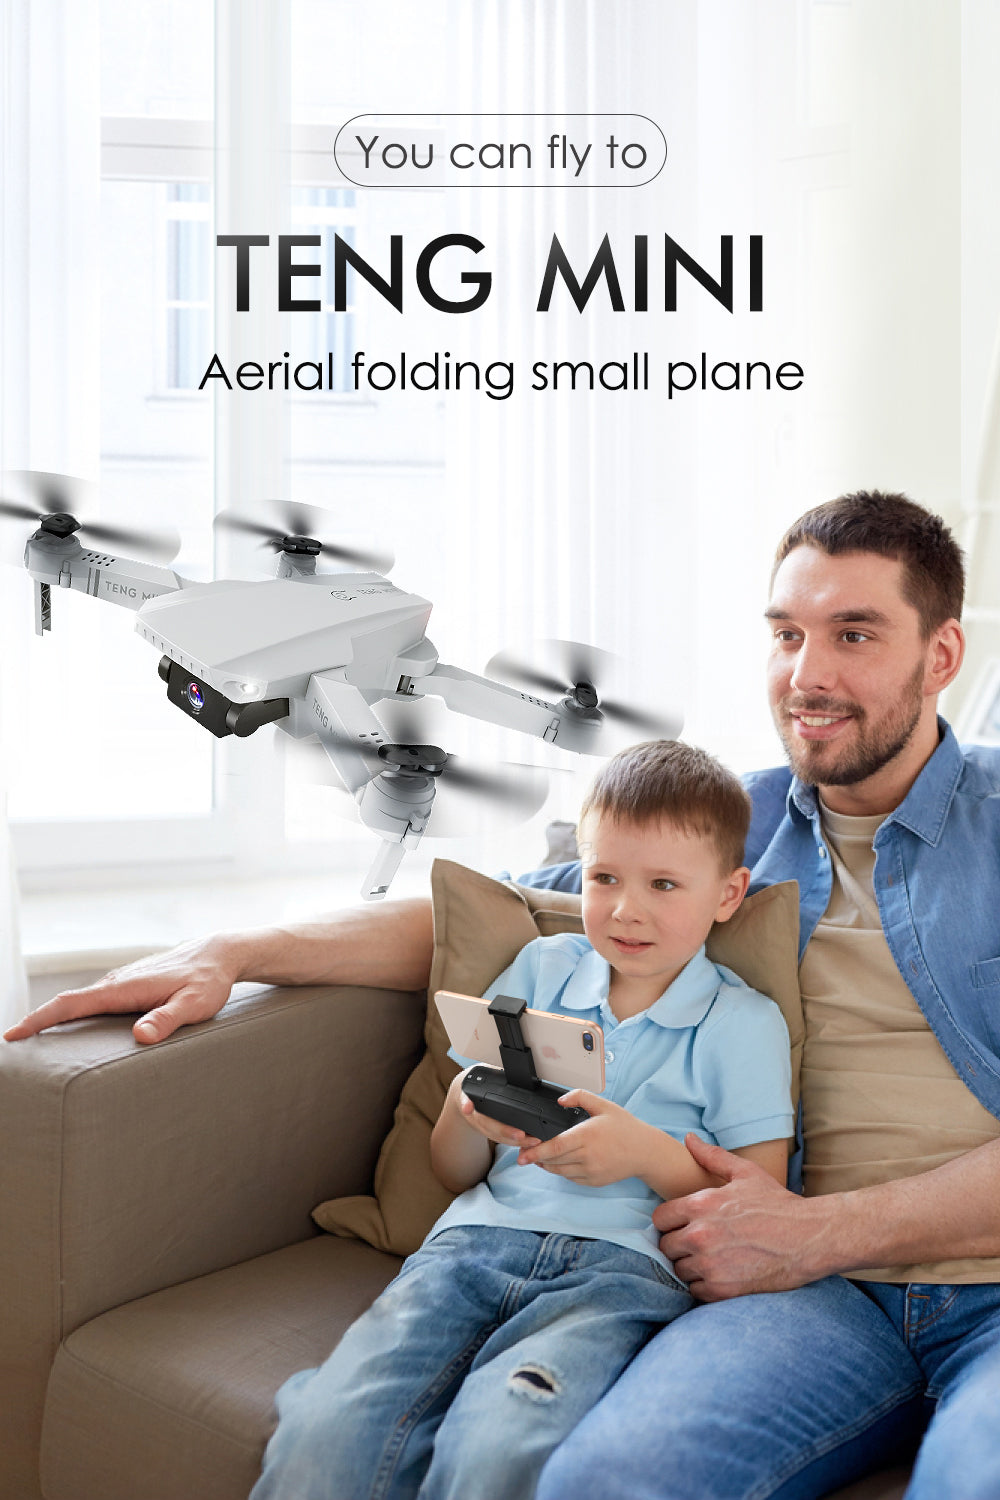 You can fly to TENG MINI Aerial folding small plane